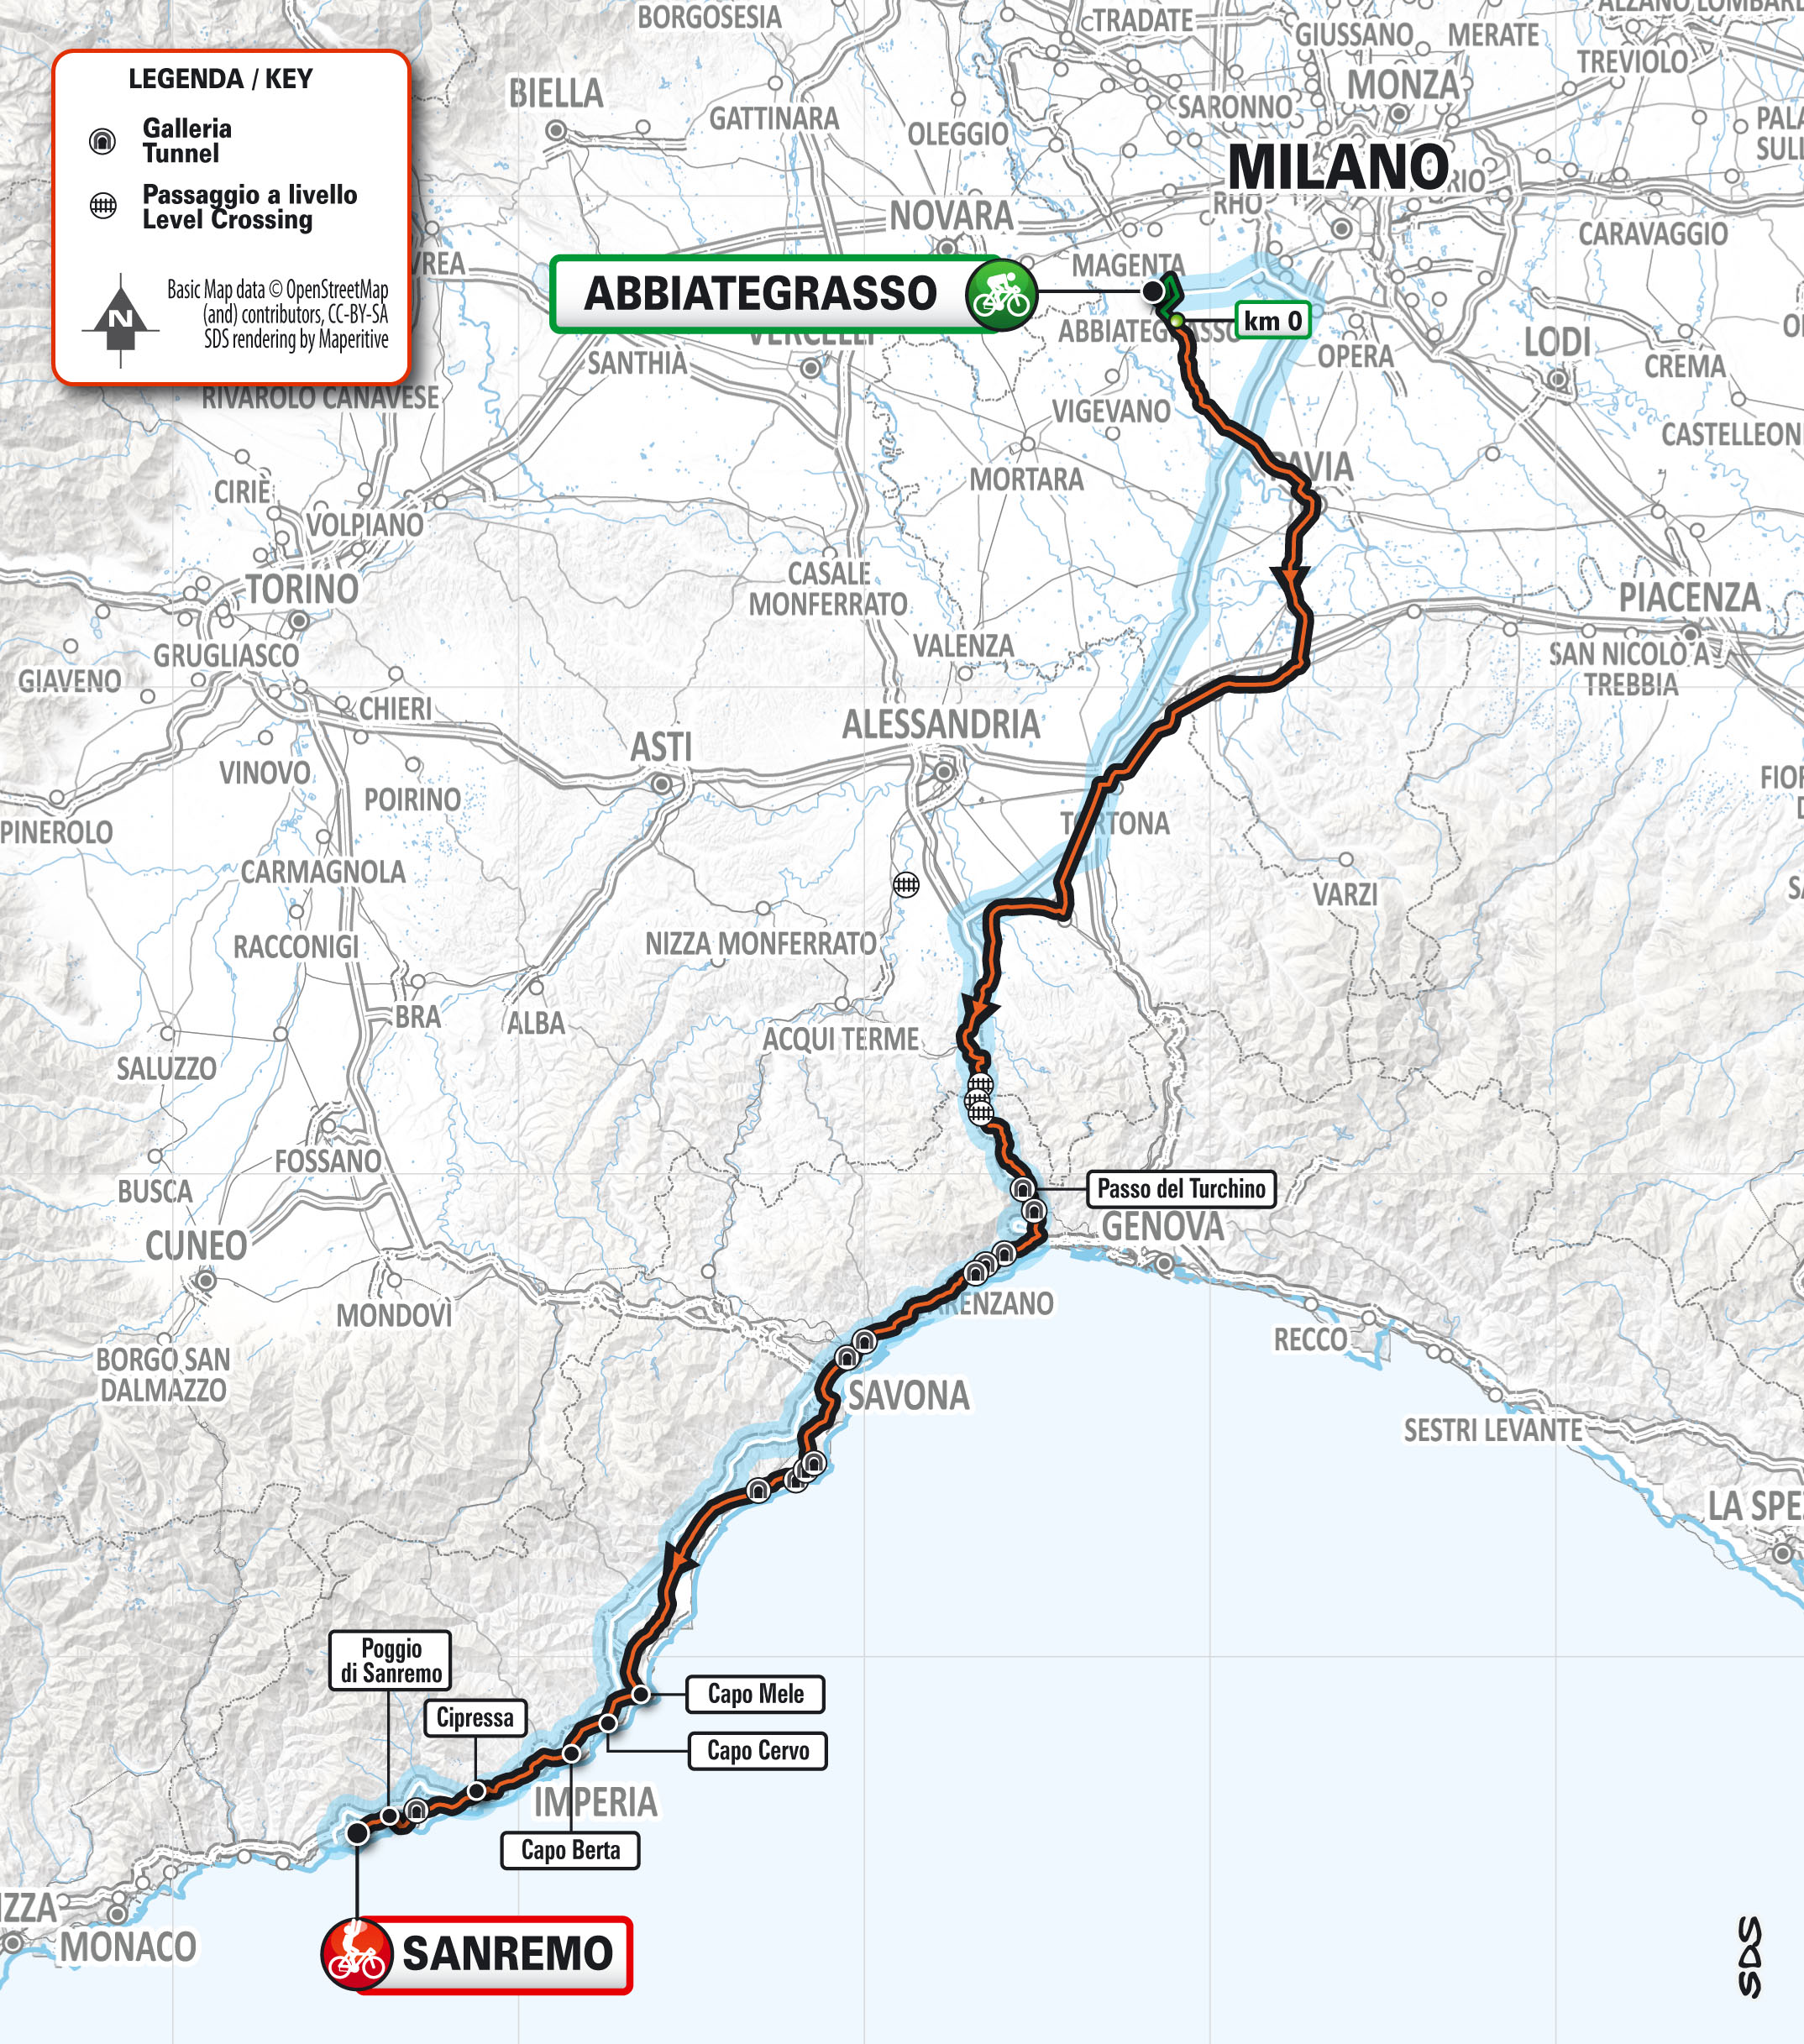 The route of the 2023 Milan-San Remo